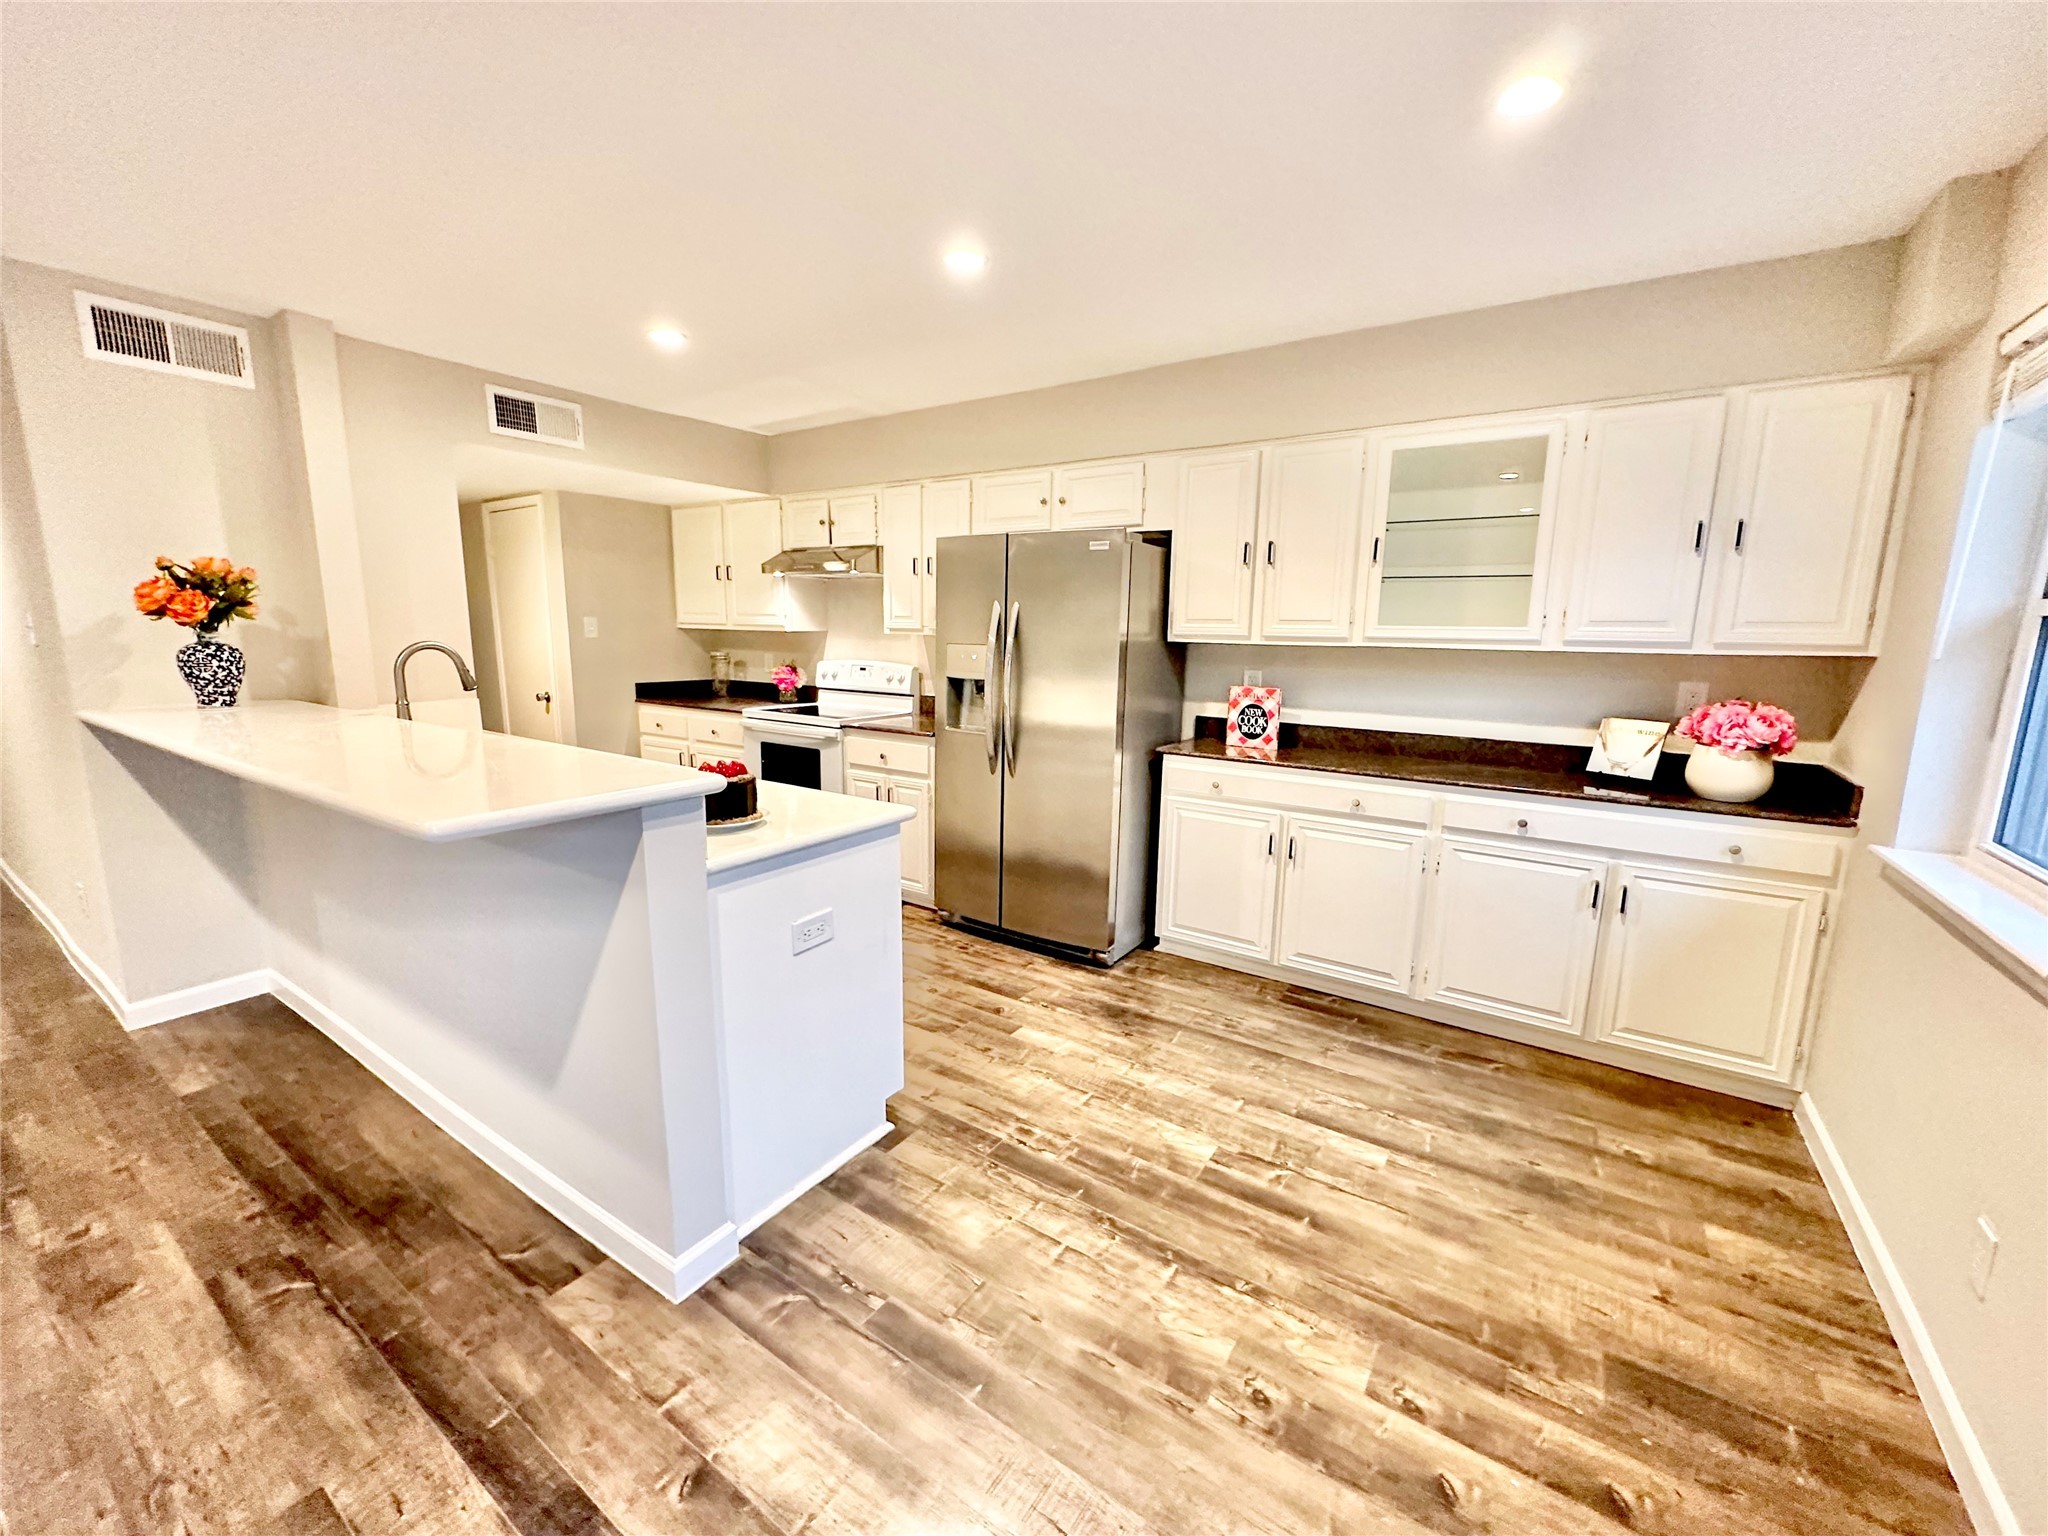 Updated kitchen has granite and white quartz counters that nicely complement each other.